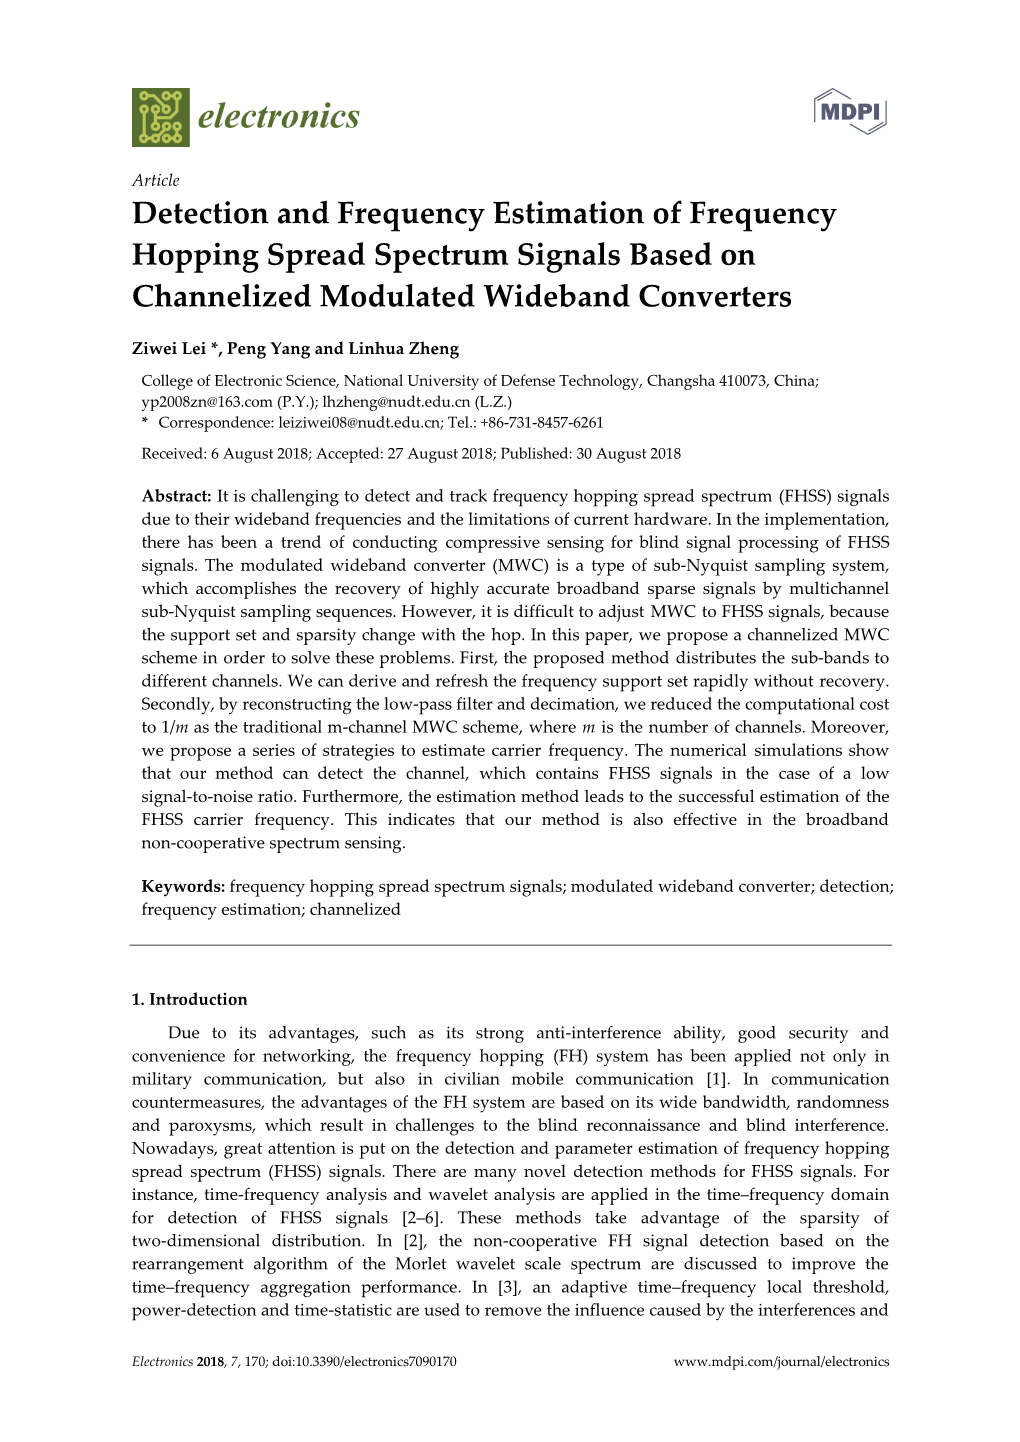 Detection and Frequency Estimation of Frequency Hopping Spread Spectrum Signals Based on Channelized Modulated Wideband Converters